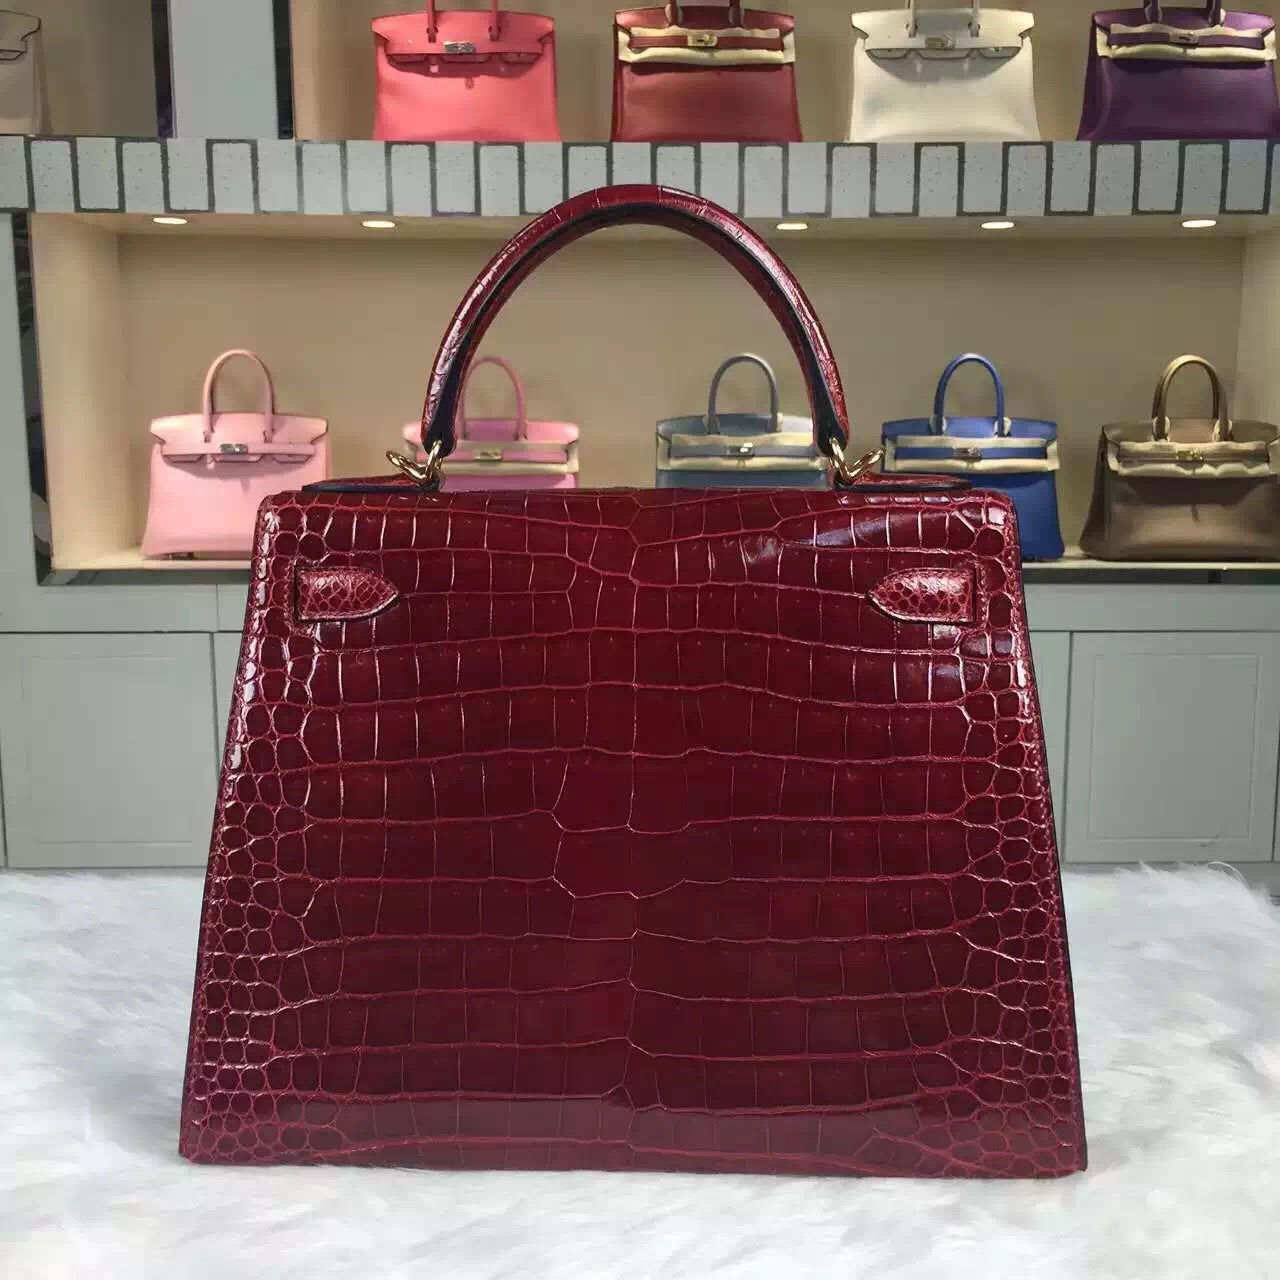 Disount Hermes New Wine Red Crocodile Shiny Leather Kelly Bag 28CM Ladies&#8217; Tote Bag